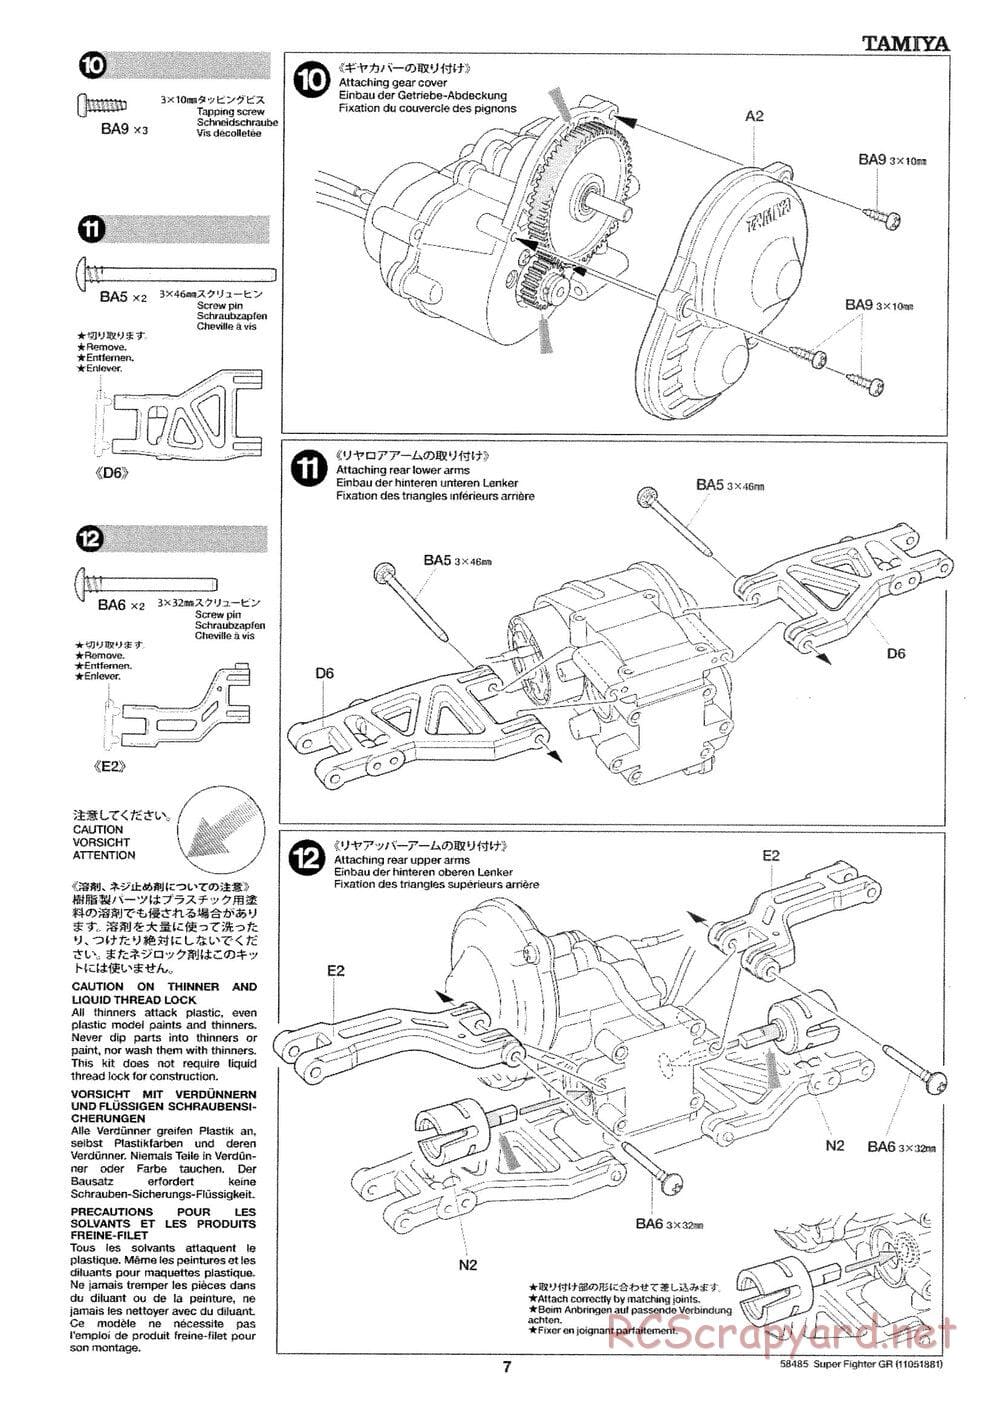 Tamiya - Super Fighter GR - DT-02 Chassis - Manual - Page 7